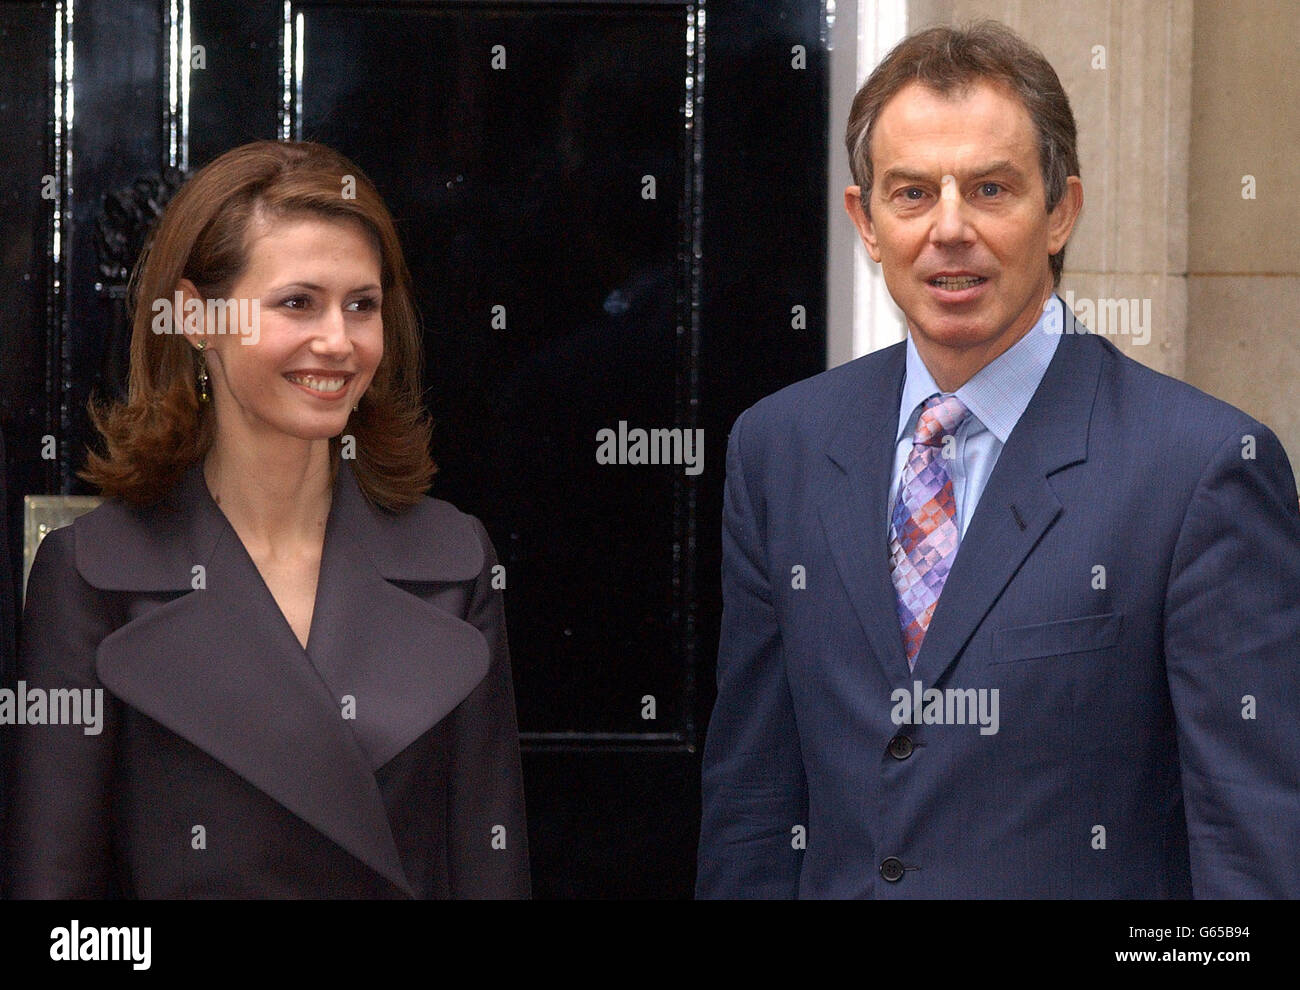 Syrian First Lady, Asma Al-Assad, meets British Prime Minister, Tony Blair, on the doorstep of 10 Downing Street, London, prior to a meeting with Syrian President Bashar Al-Assad. Stock Photo